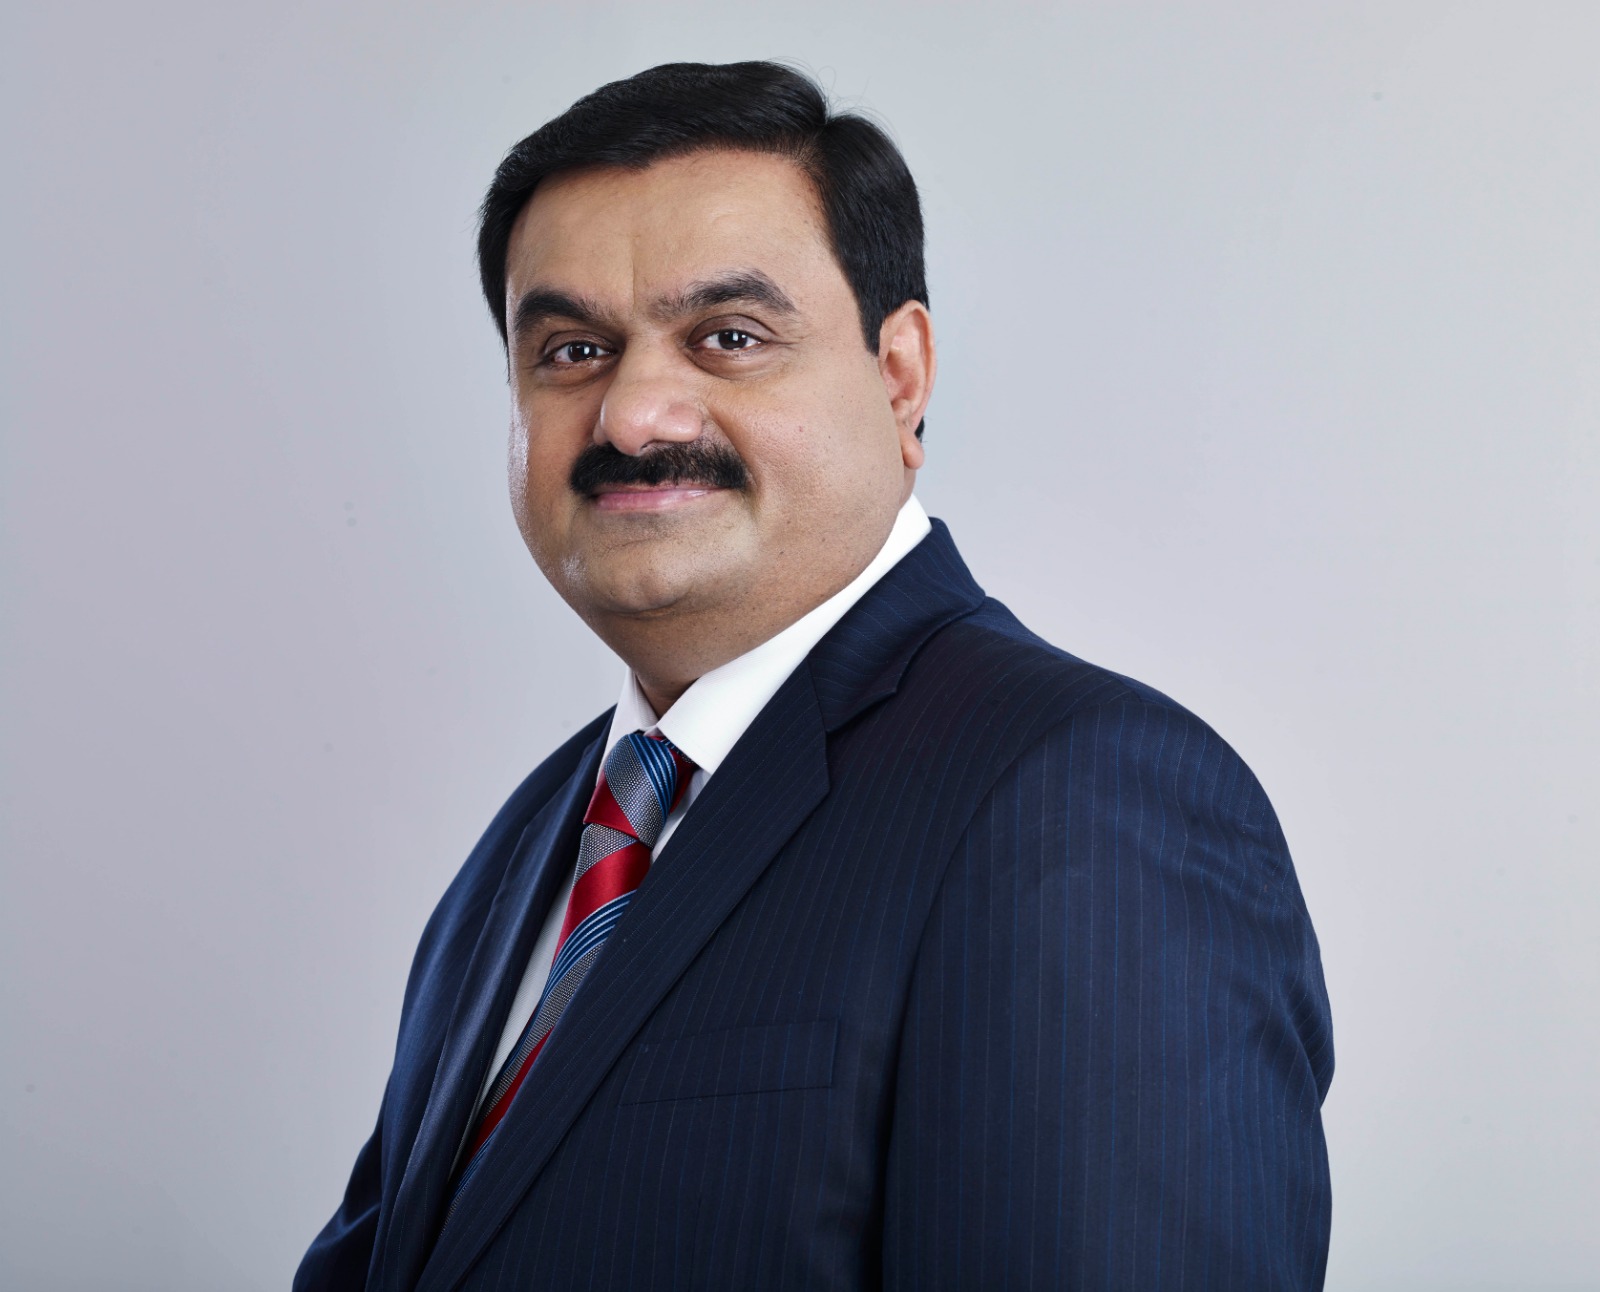 Promoters to Invest INR 9,350 crore equity in Adani Green